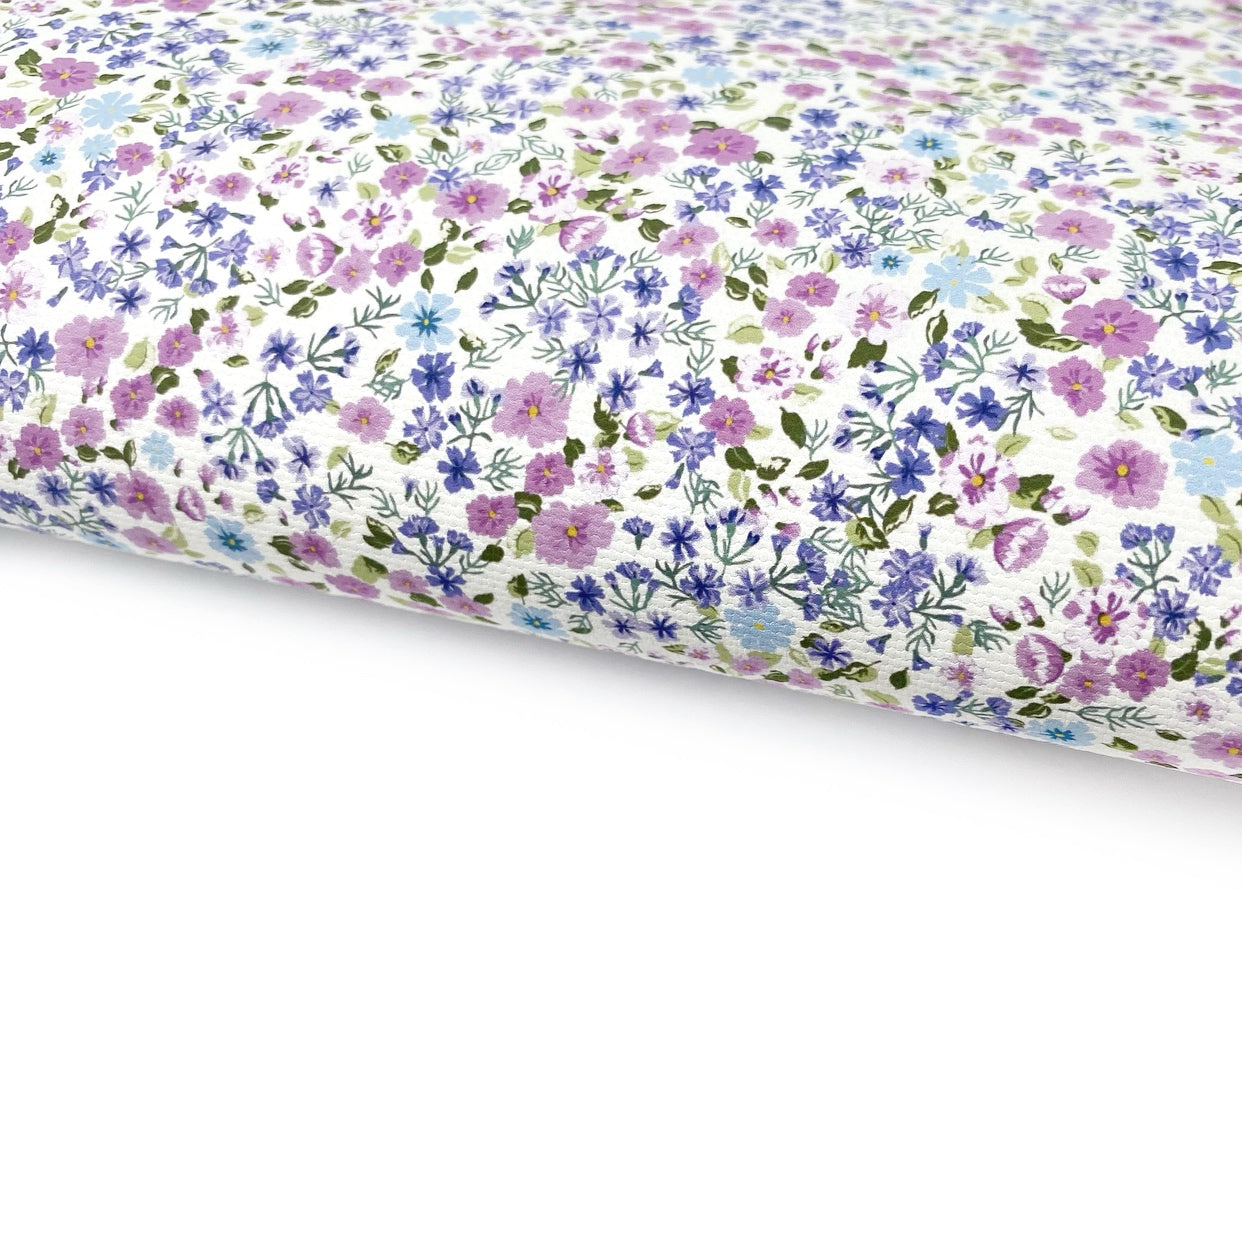 Lilac Blossoms Floral Lux Premium Printed Bow Fabric